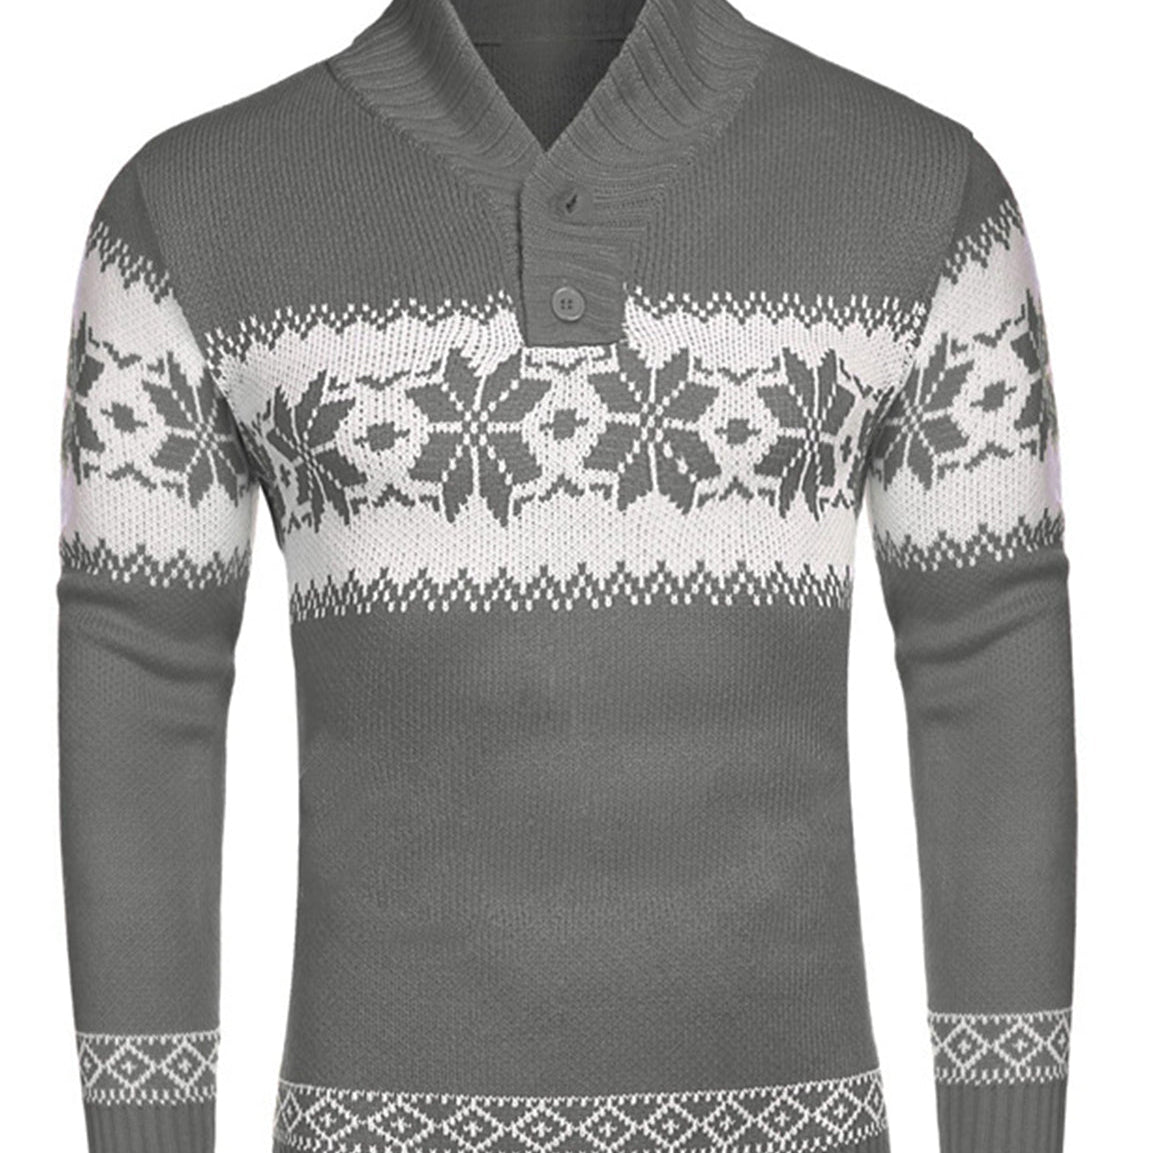 Men's Christmas Snowflake Print Button Up Long Sleeve Sweater